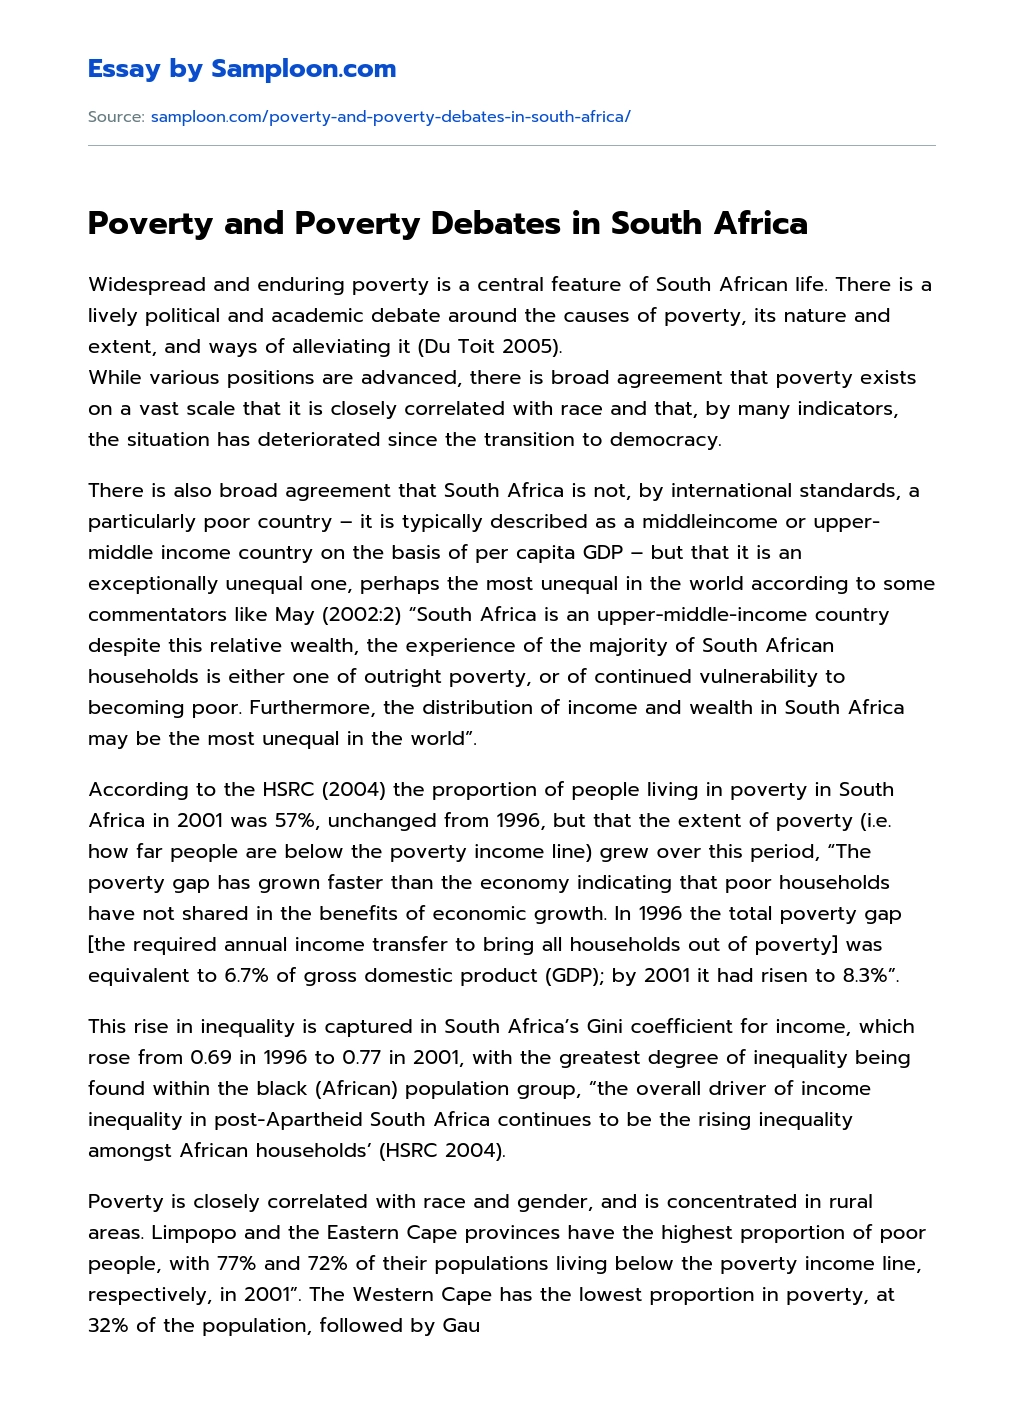 Poverty and Poverty Debates in South Africa essay